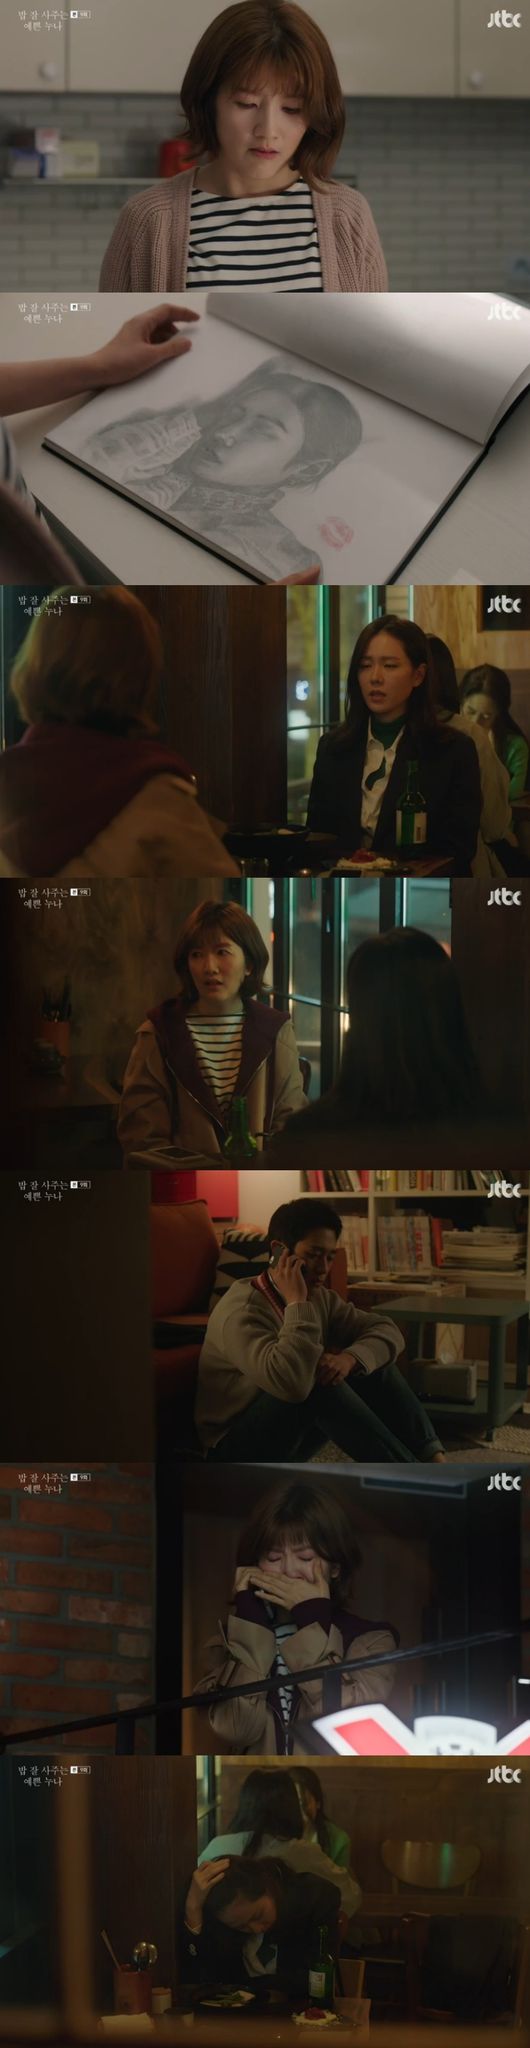 So-yeon Jang was heartbroken by Son Ye-jin and Jung Hae In; So-yeon Jang, who noticed the relationship between the two and felt betrayed.So-yeon Jang tells Son Ye-jin, who came to the scene, I was thrilled by the jury, but the two eventually accepted the relationship between the two at the end of their worries. On JTBCs Bob Good Sister, which was broadcast on the 27th, he noticed the relationship between Jung Hae In and Jin-ah (So-yin). The image of Eon Jang) was drawn.The Primary Election is confident to see Jin-ah in Jun-hees sketchbook. On that evening, Jun-hee knows that Jin-ah has gone to the room of the Primary Election, but the Primary Election pretends to sleep.The next day, Primary Election goes to the mothers cemetery and says, I can not see Junhees hard work. Junhee finds out that she noticed her relationship with Jin-a when Primary Election kept avoiding herself.Junhee tells Jin-ah this fact, Jin-ah visits the Primary Election. The two people talked about soju, and the Primary Election is angry that we are playing with Jun-hee.I like it more, Jina confessed.Primary selection says, I dont know how Ive spent these days, Im thrilled by the betrayal.Jina said, I actually did not think of you.I am sorry, but I have only seen Junhee. At that time, Junhee called the Primary Election and said, Jin-ah is not good. I shook.So dont make it too hard.I liked it a lot, so I was greedy. When I heard that, Primary selection shed tears, and I went back to the bar.Eventually, Primary Election decides to understand Jin-ah, and the two make up: Jun-hee smiled when she found out that the two had made up./ Captured Bobs Good Sister